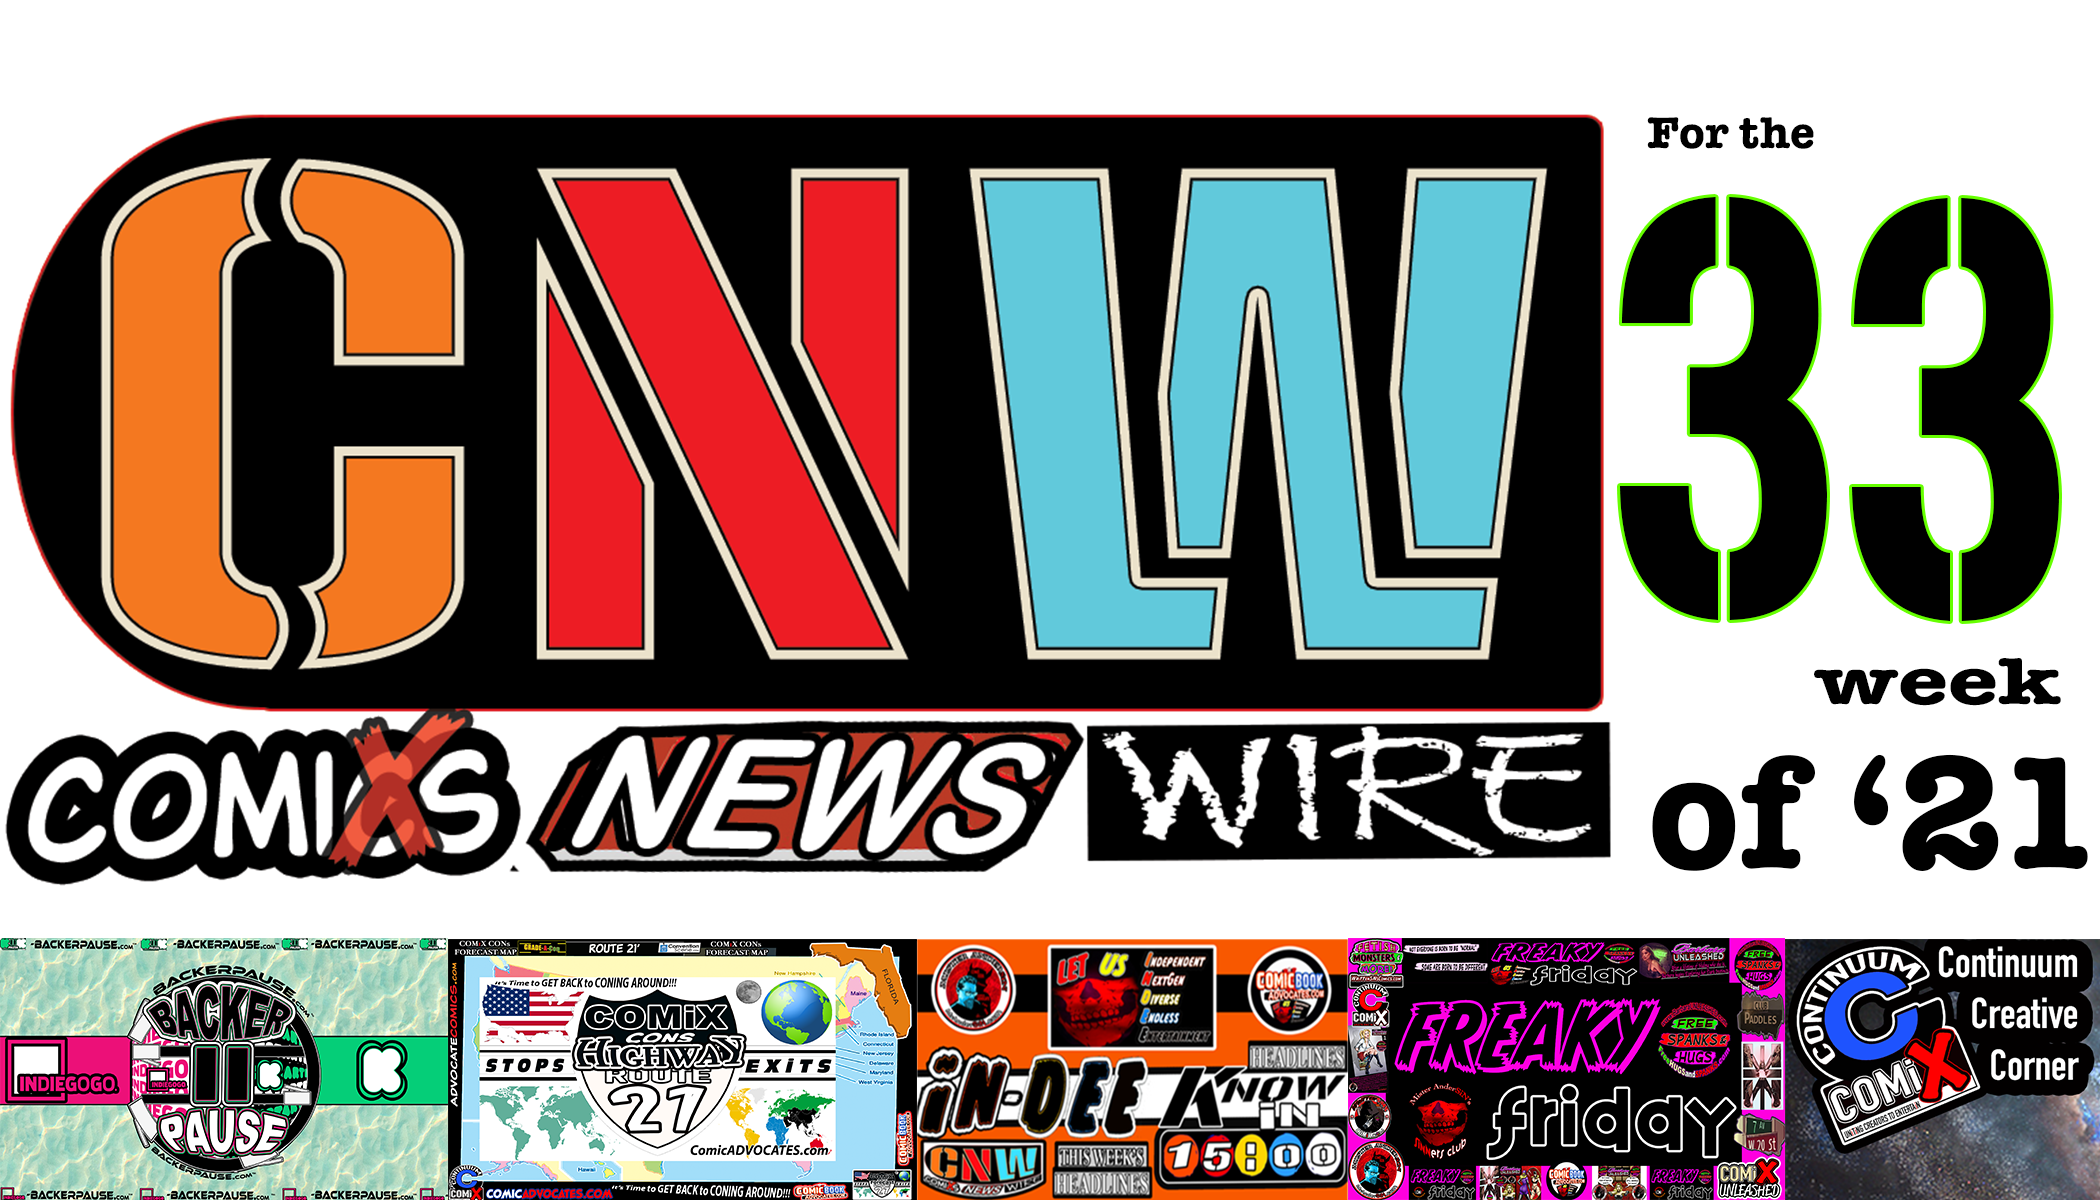 Week 33 of ’21-This Week in COMiX STREAMS.  THE COMiX NEWS WiRE.